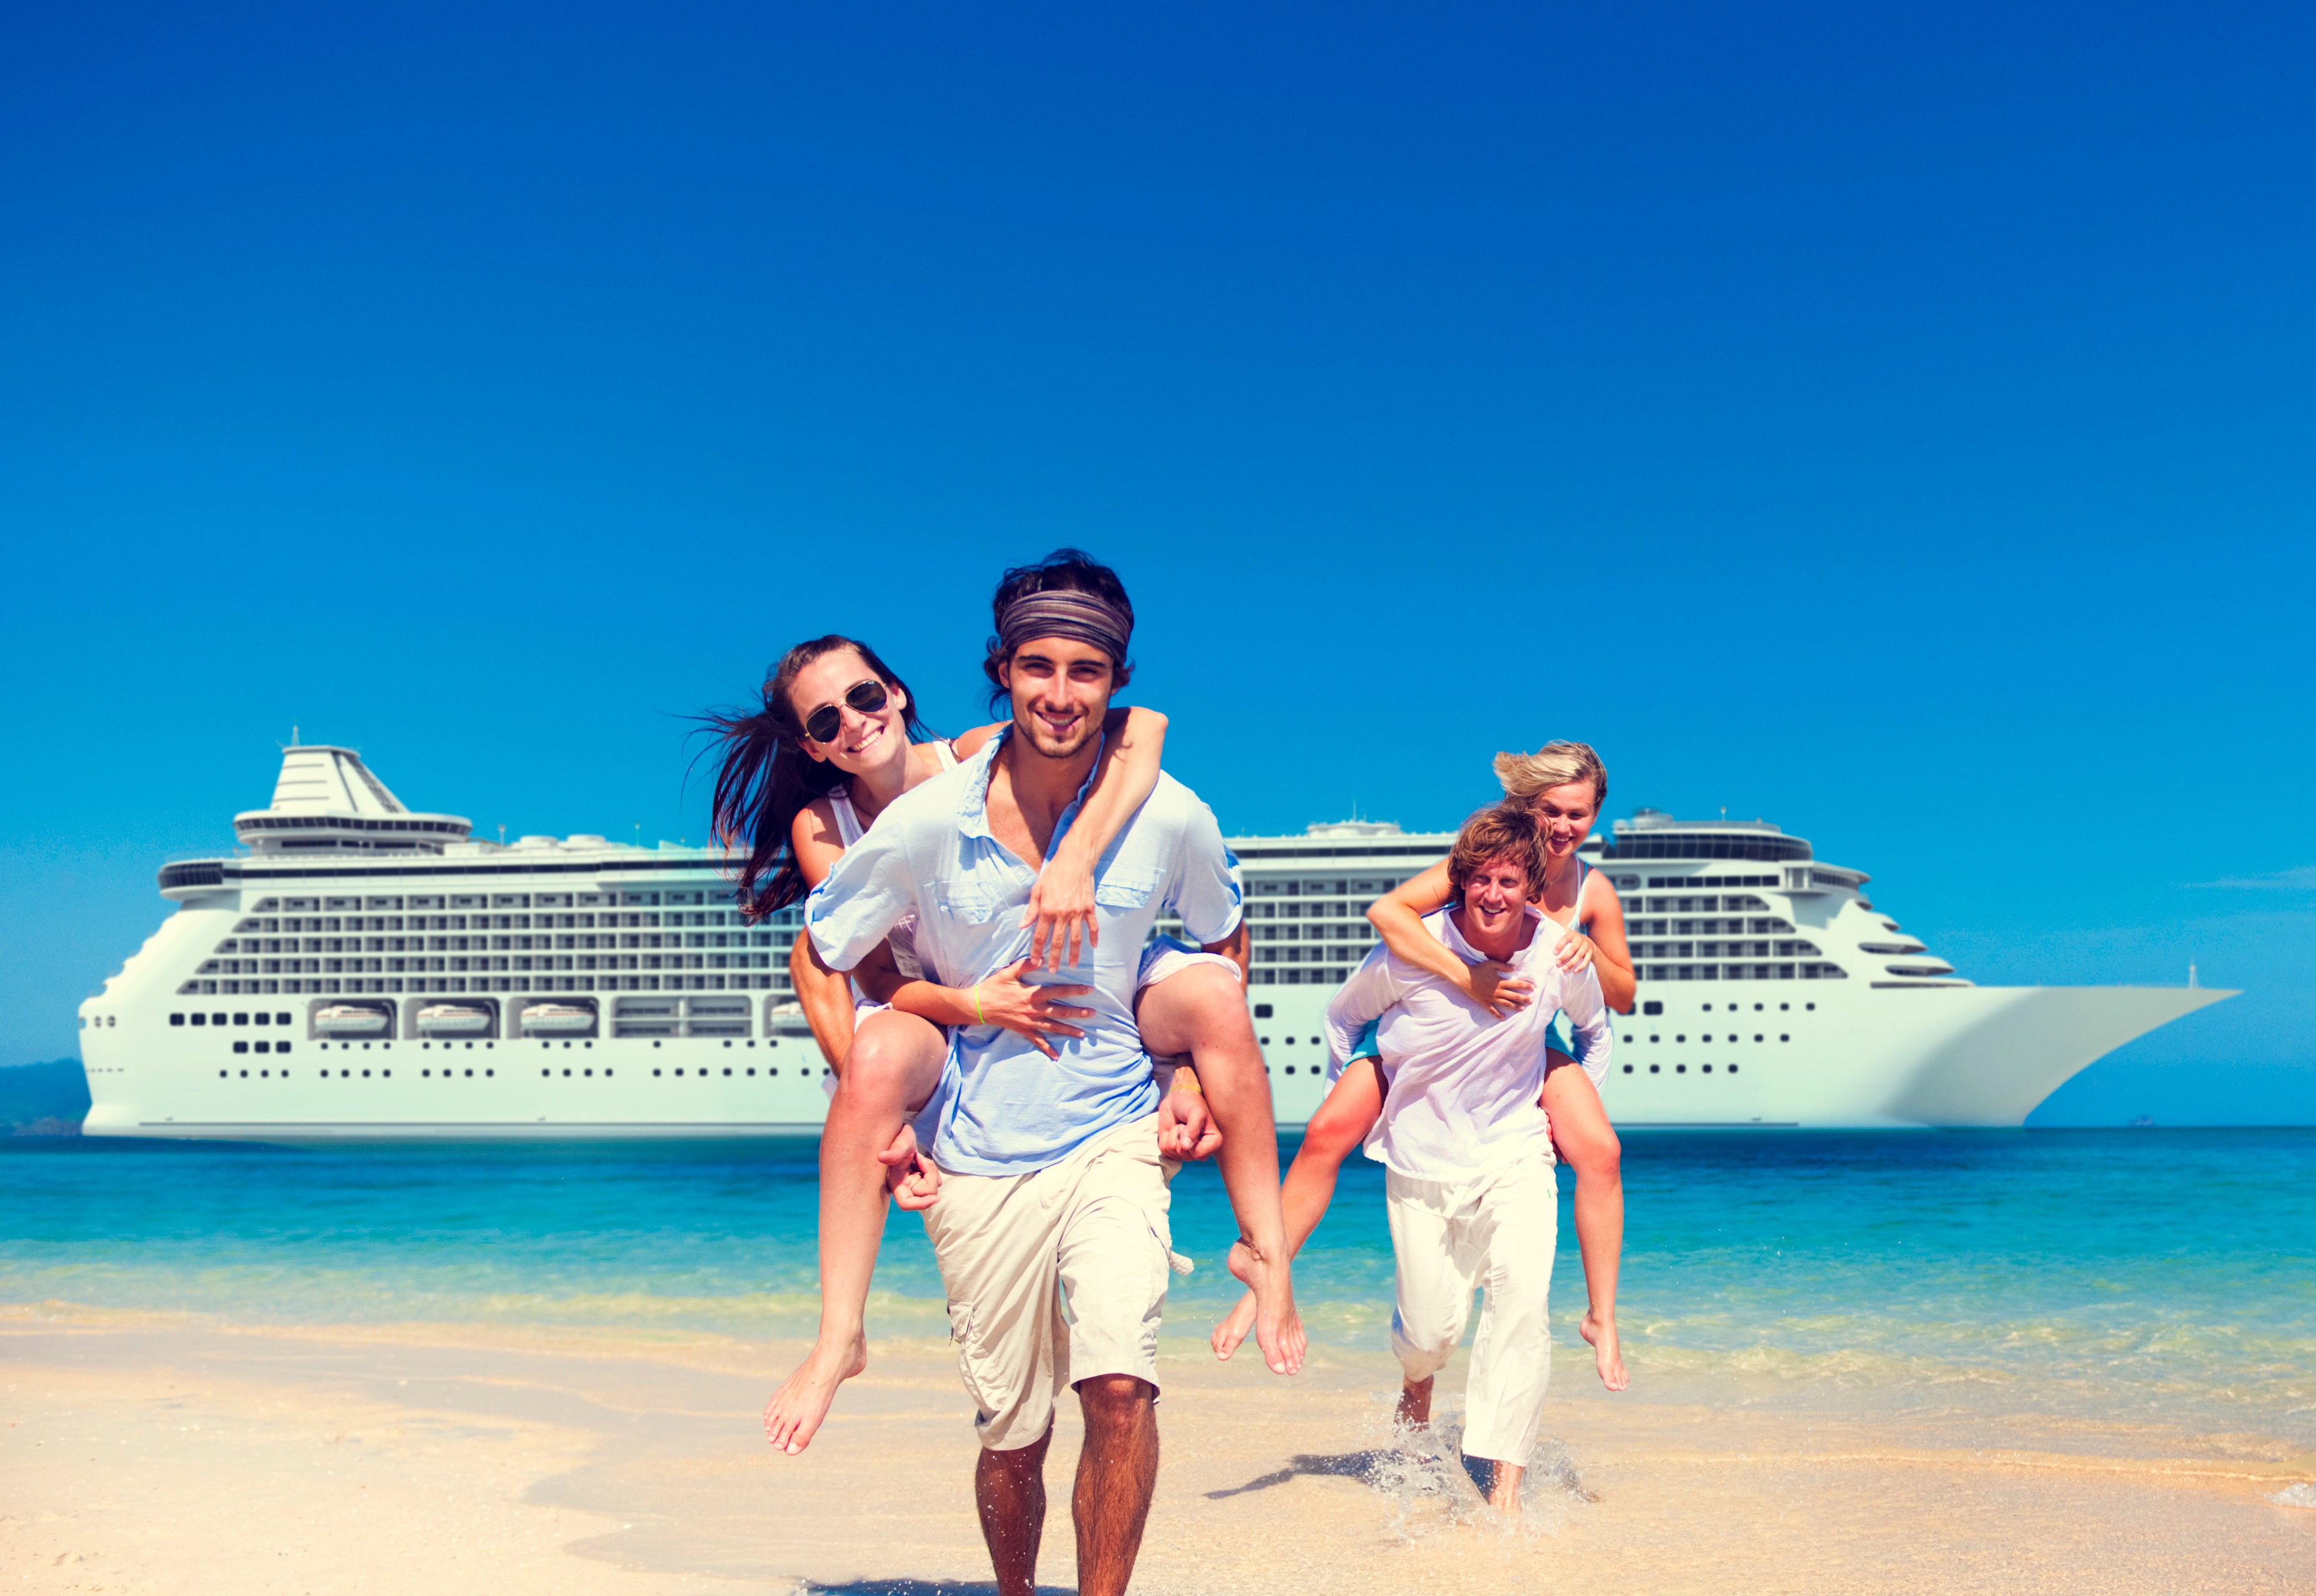 Two couples playing on the beach with a cruise ship in the background.